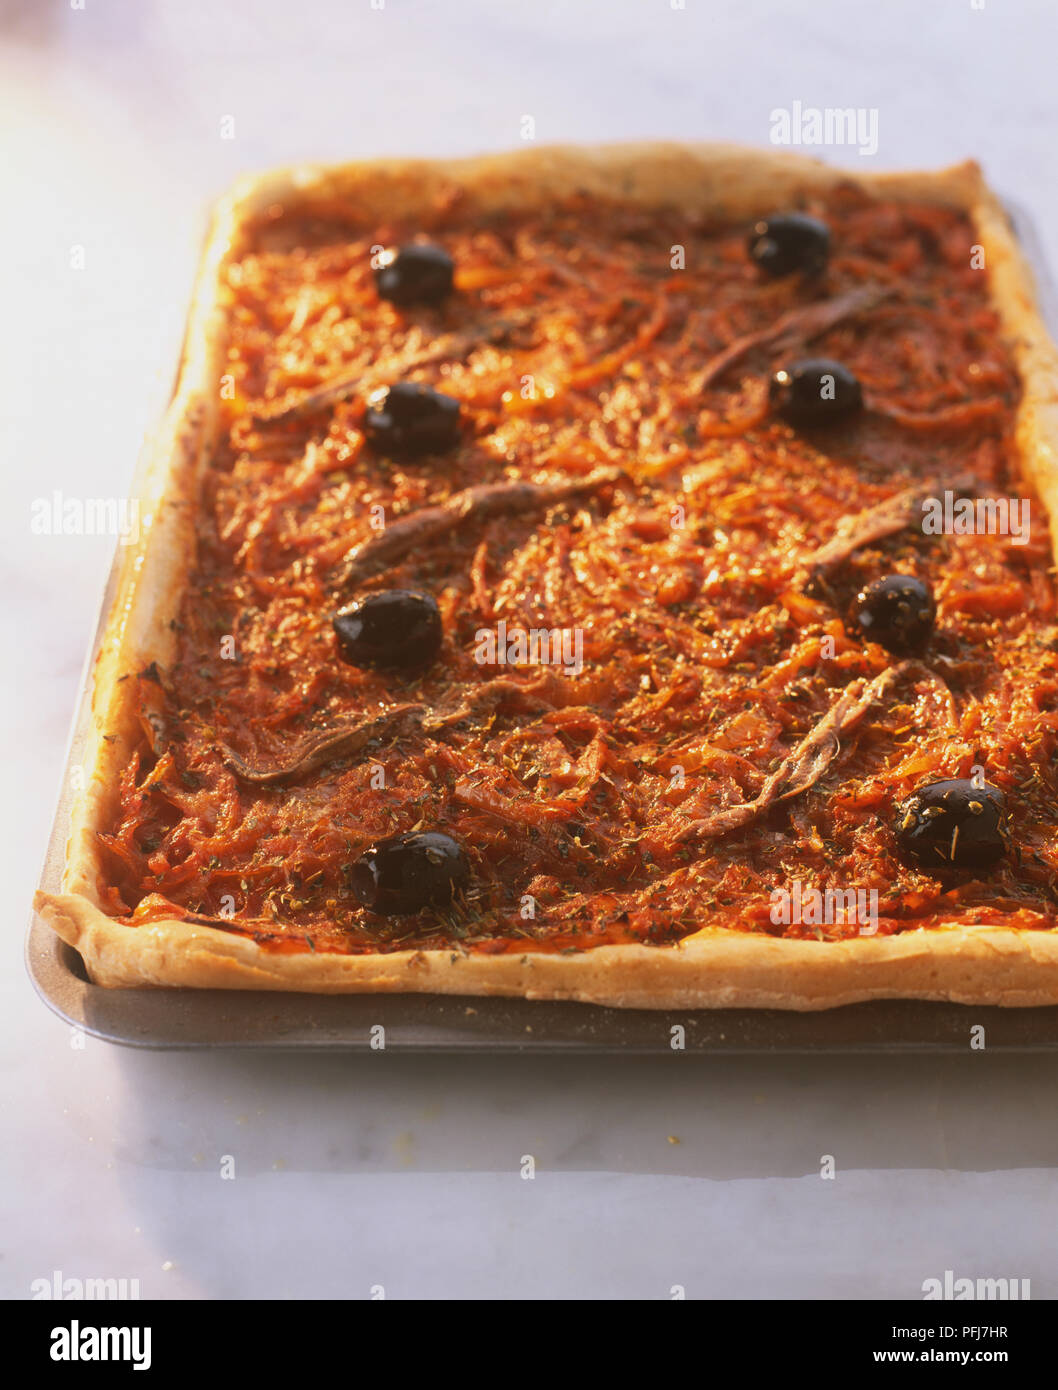 Pissaladiere Pizza, on rectangular baking tray, with crispy, risen crust, topped with onions, anchovies and olives Stock Photo